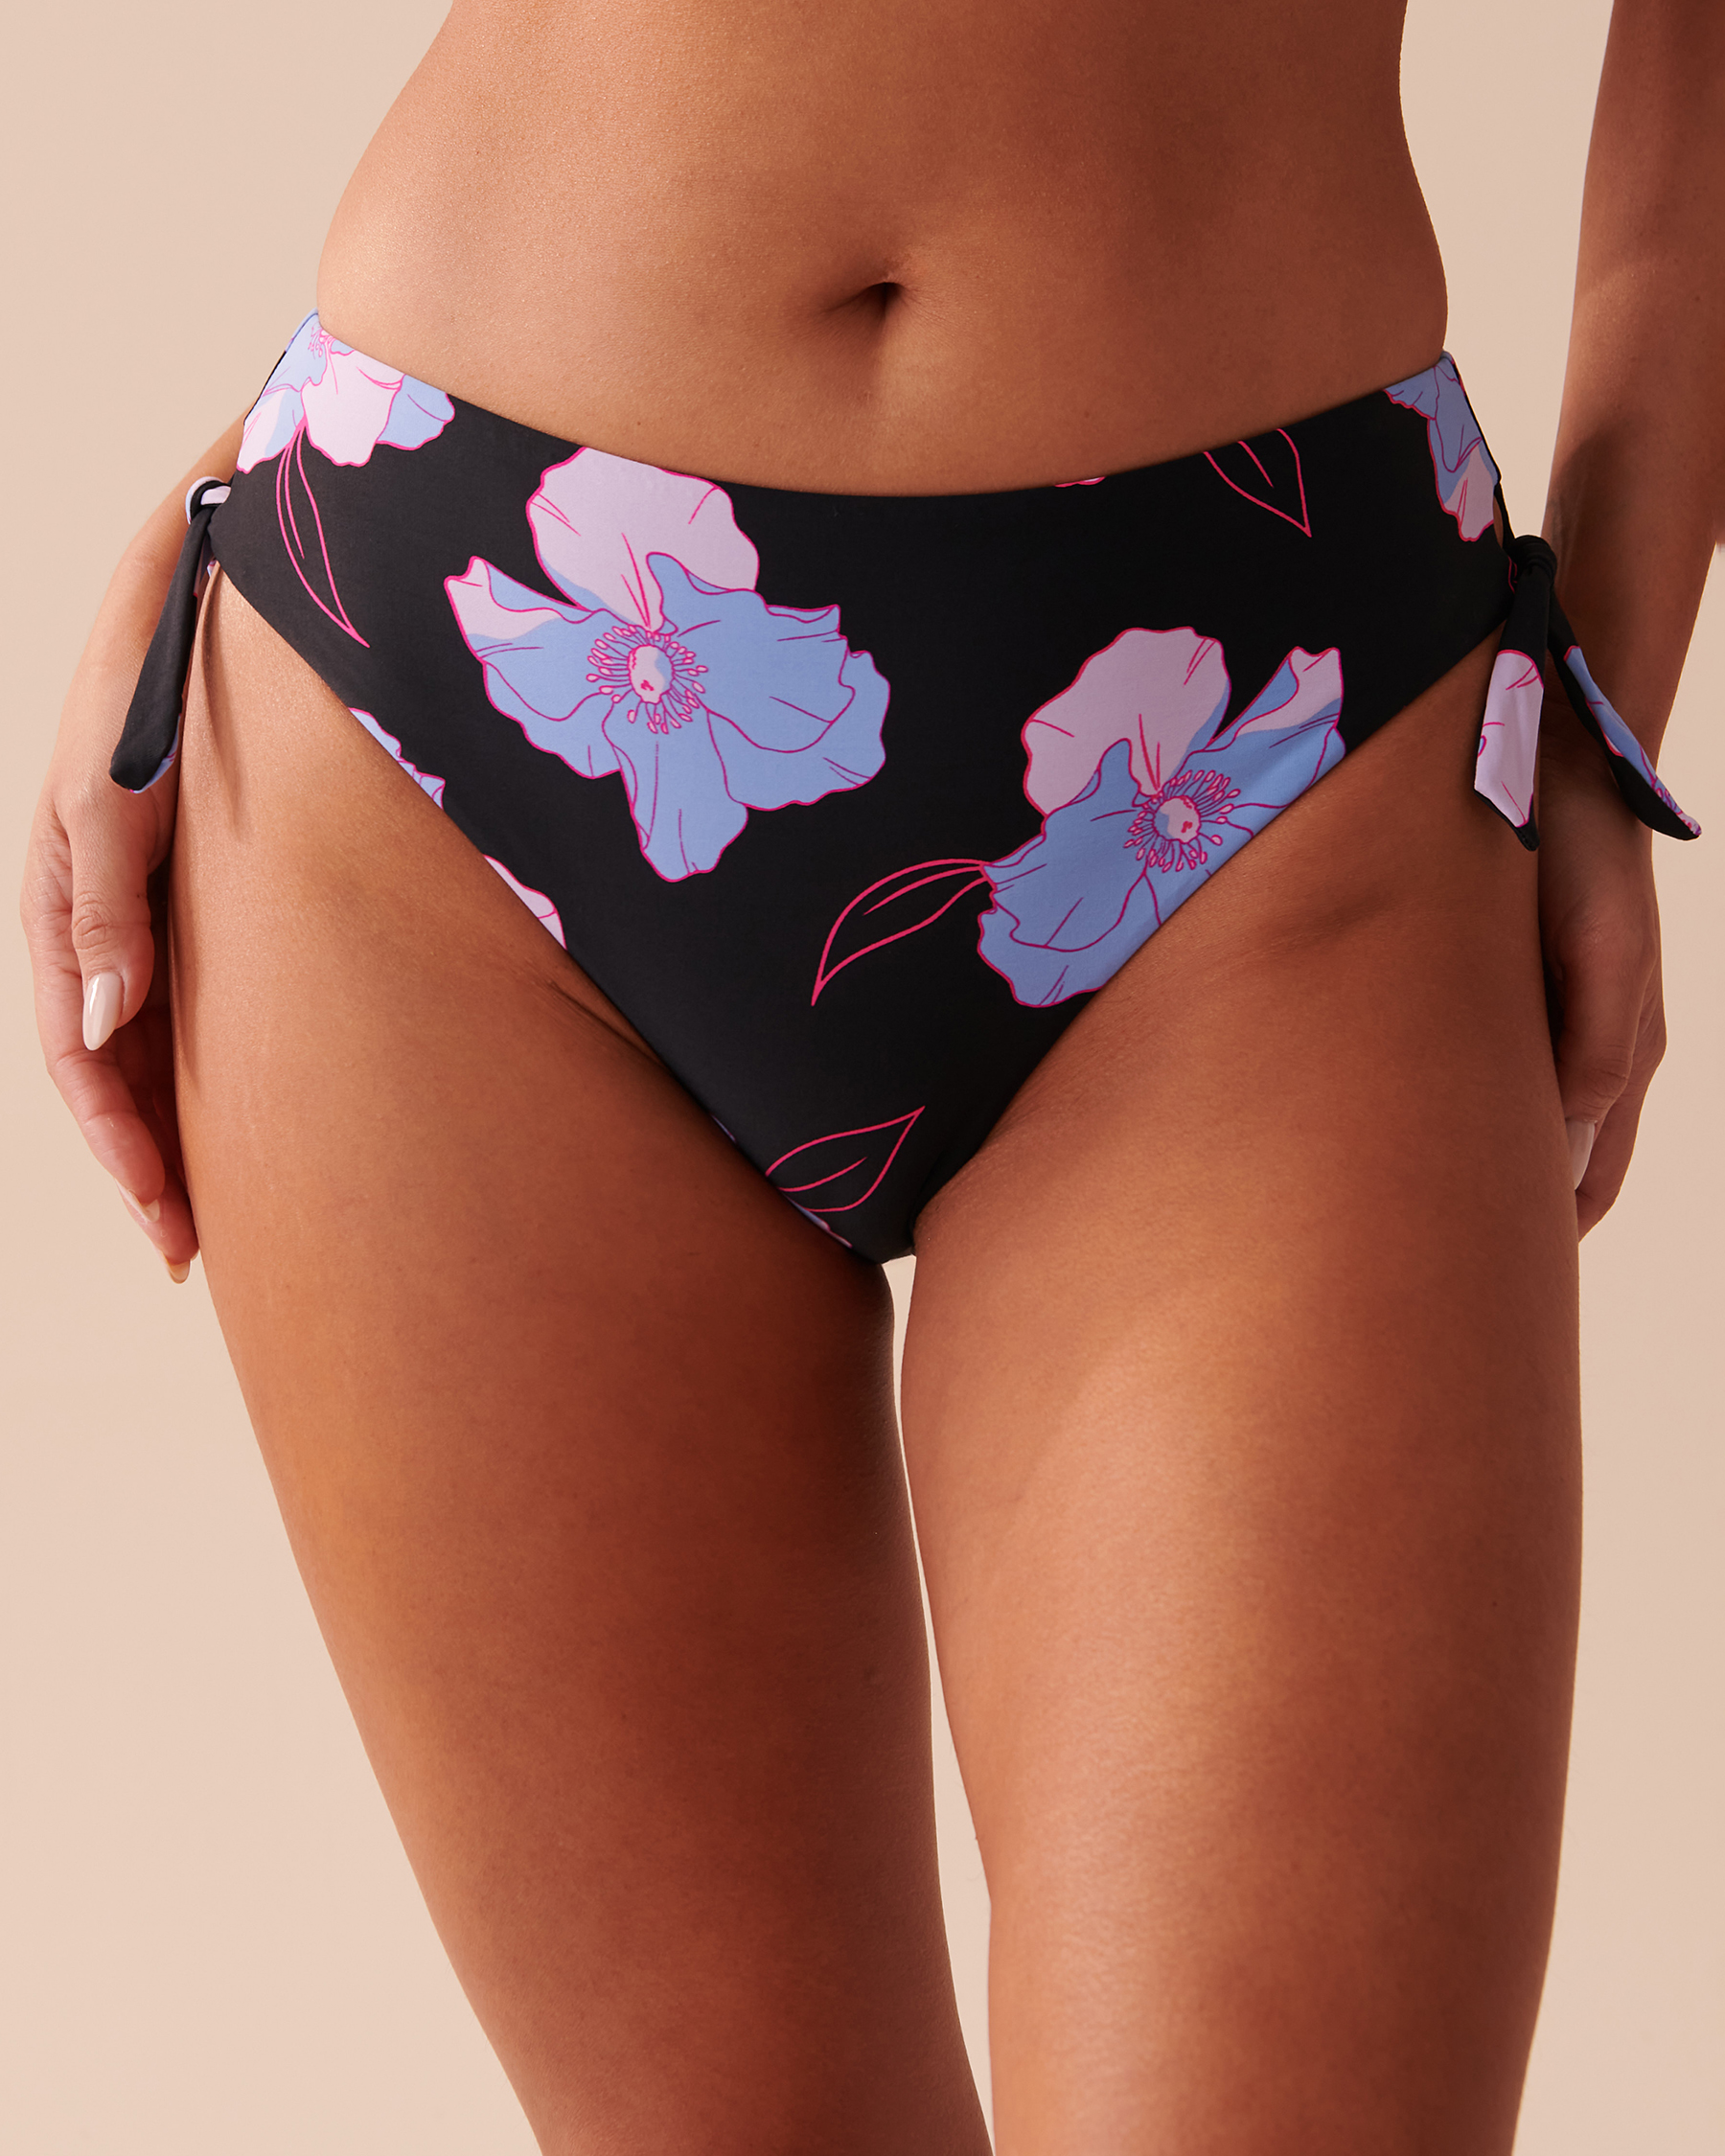 216 Pieces Rose Bikini With Heart Design Assorted Color Size 2xl - Womens  Panties & Underwear - at 